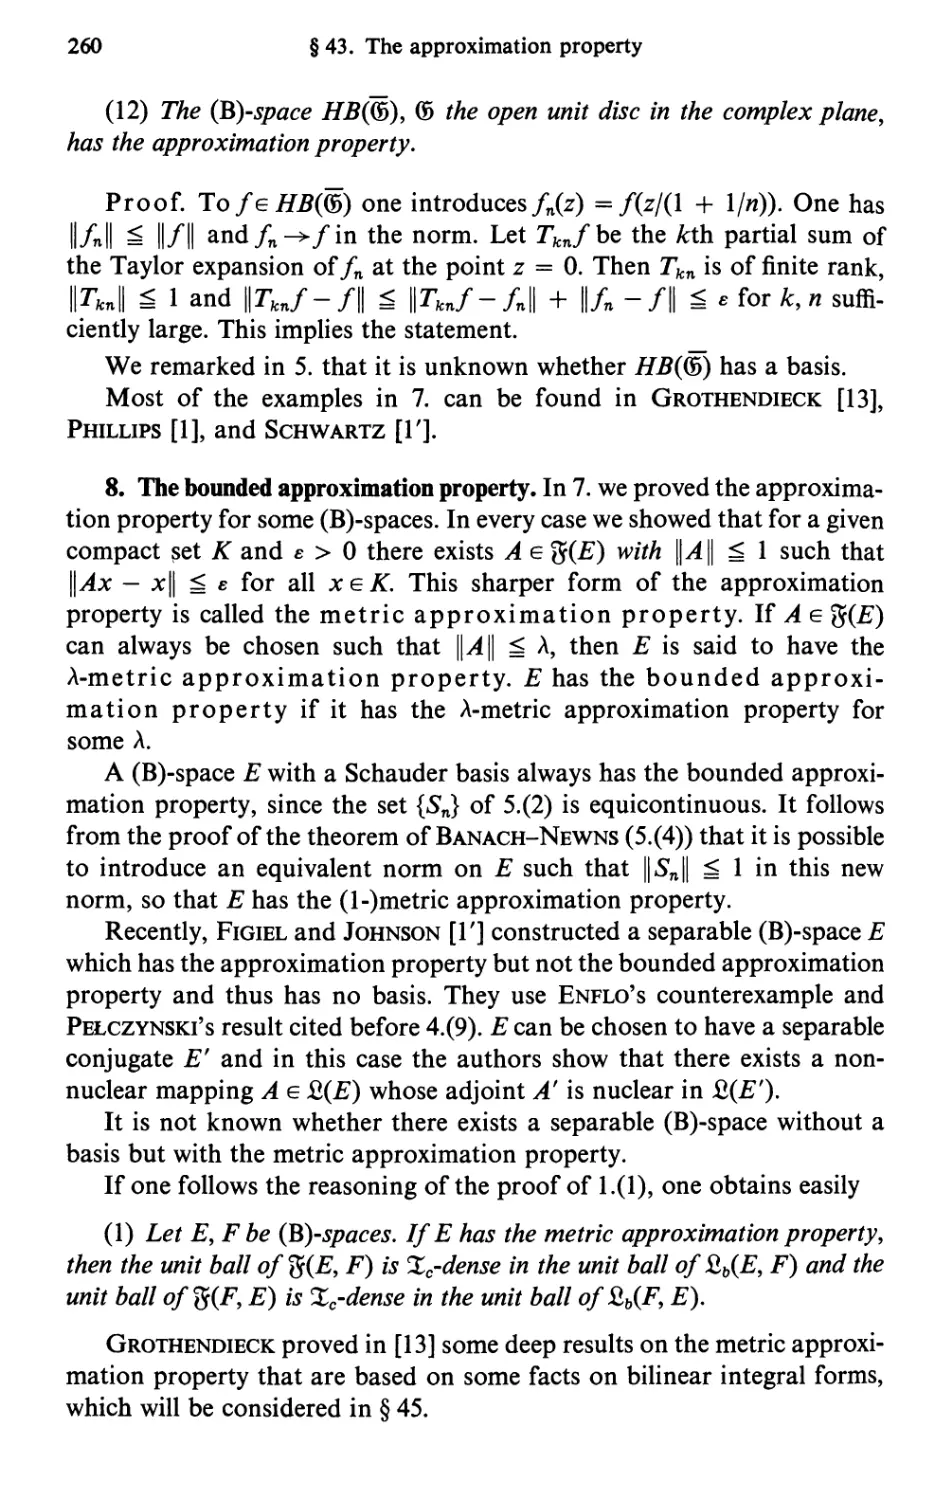 8. The bounded approximation property